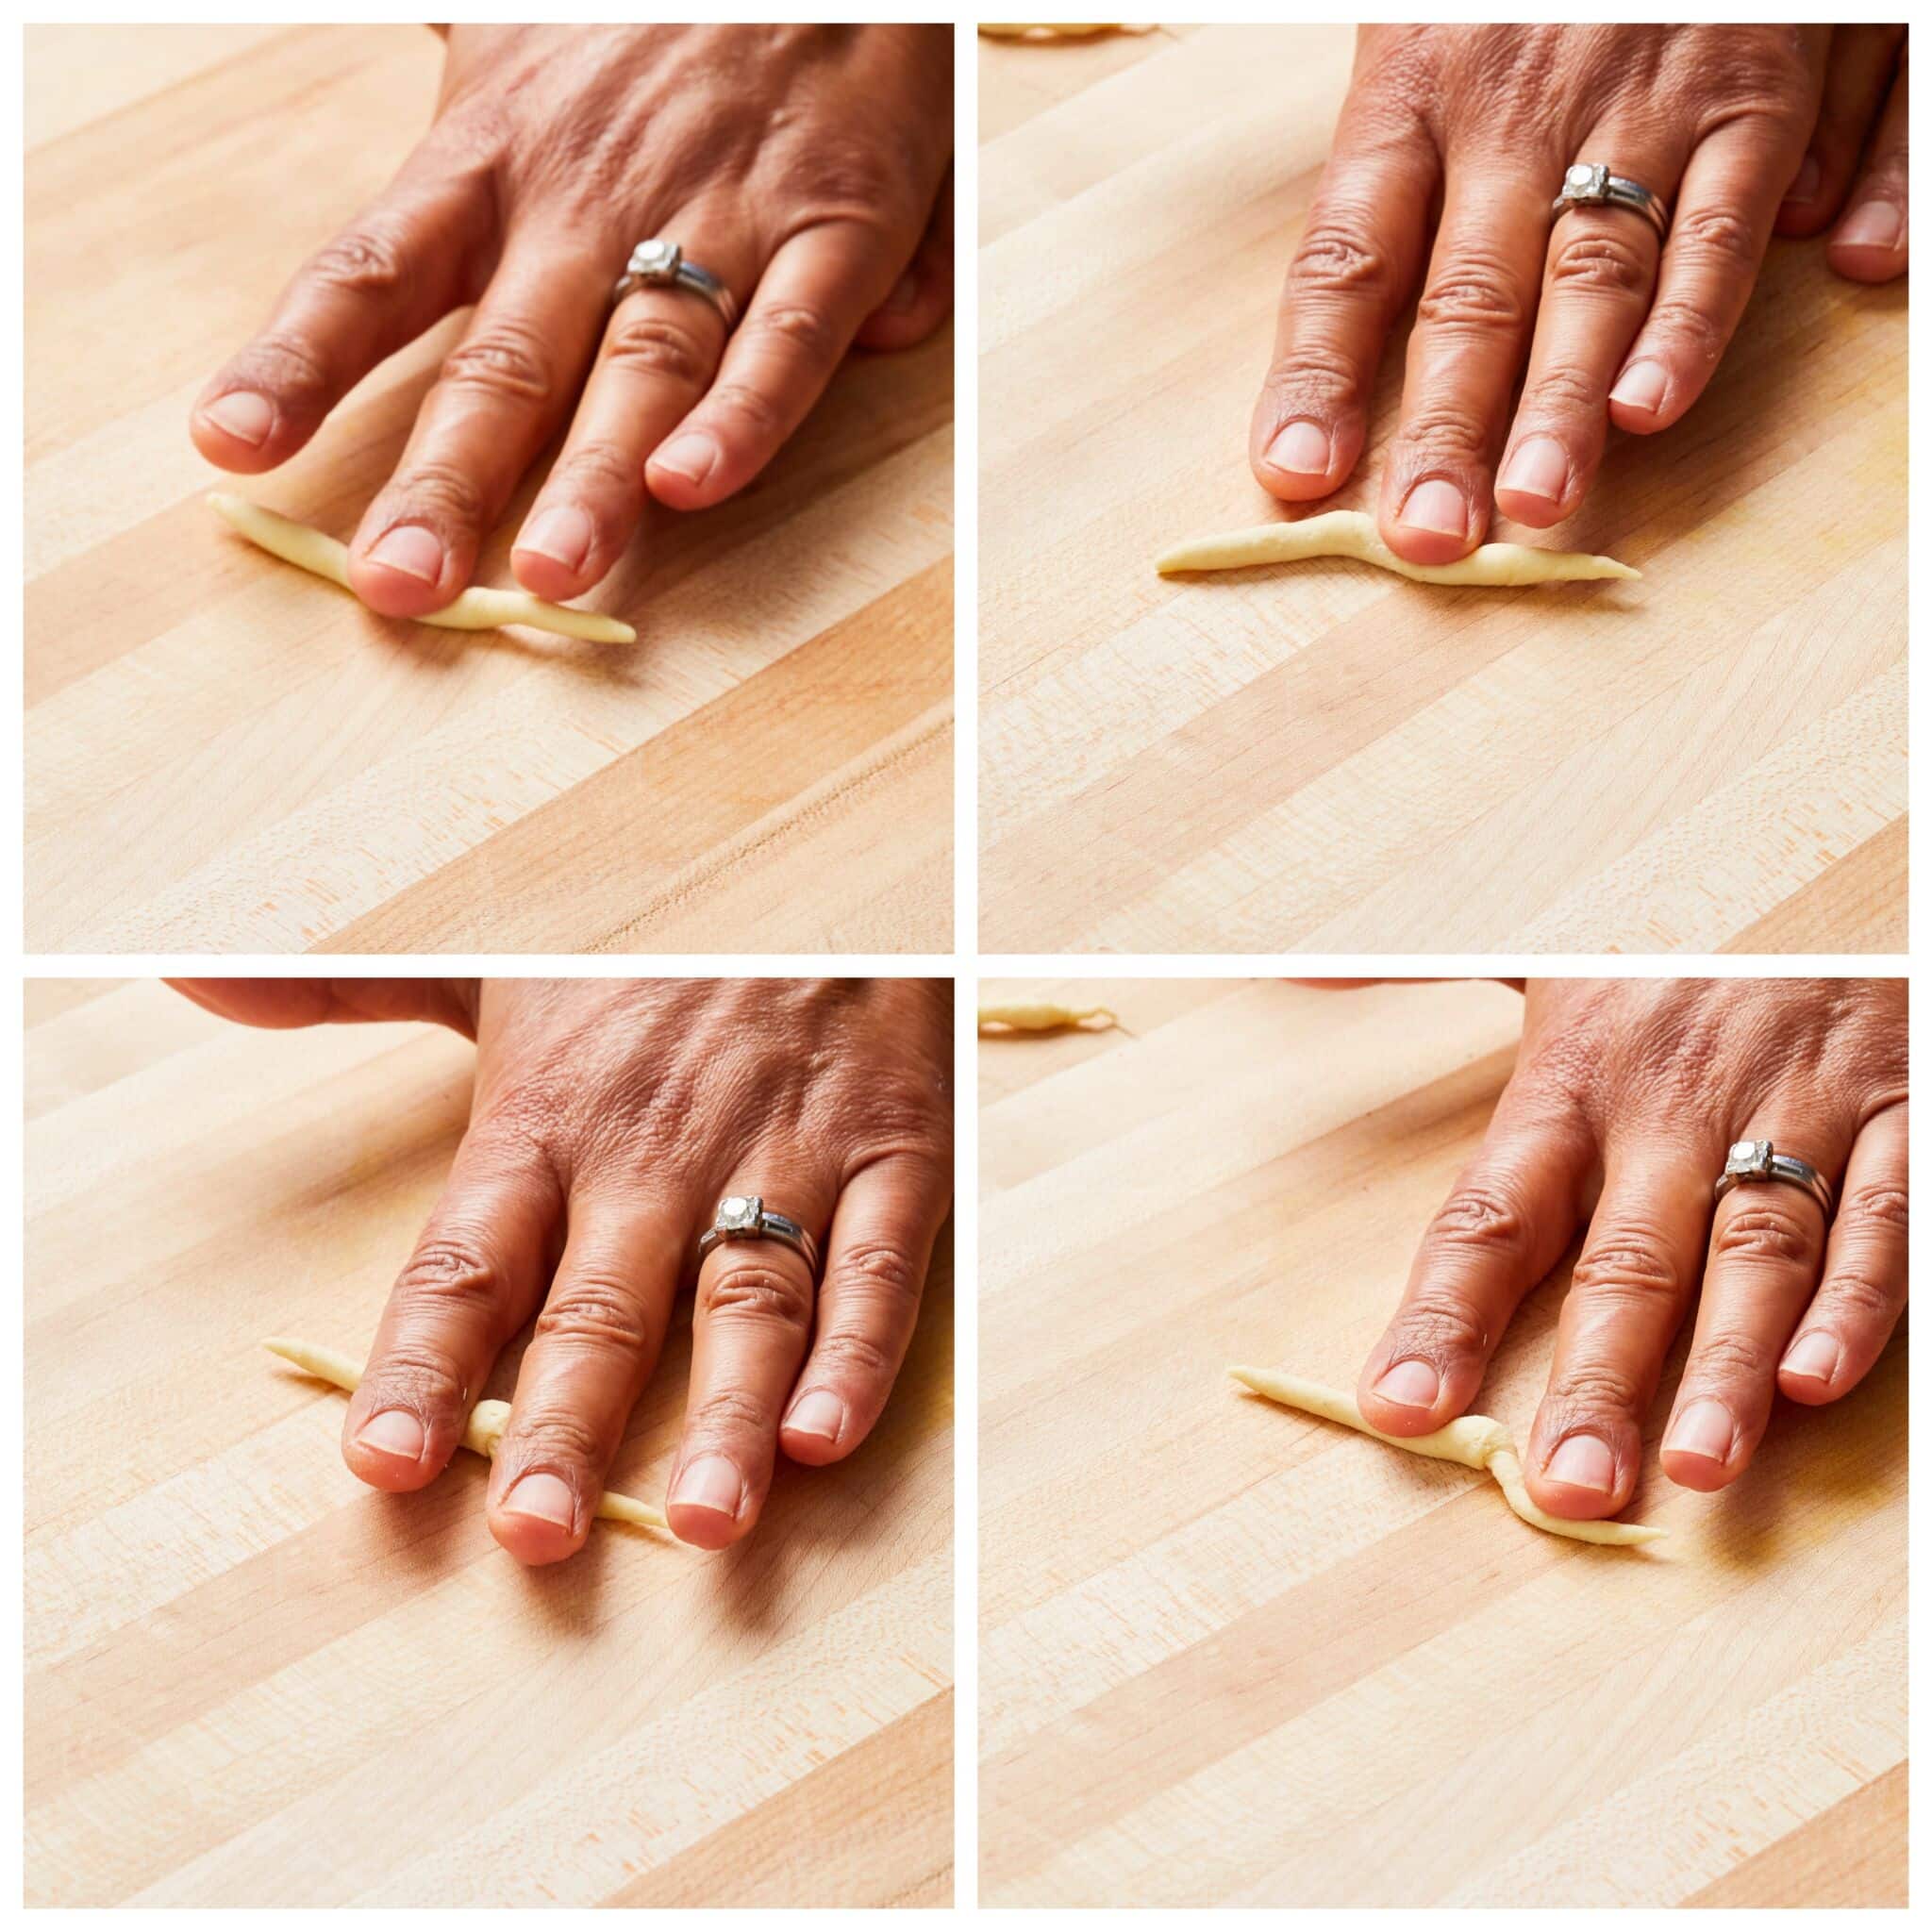 Step-by-step instructions on how to shape Trofie pasta: Working with one piece of dough at a time, imagine that there is a large triangle pointing away from you on your work surface. Place only one piece of dough at one corner of the imaginary triangle close to you and using a flat palm, roll the dough along the triangle (diagonally away from you) to the far tip and then down the other side. When you get to the opposite end of the triangle, the dough should have rolled off of the outer edge of your palm. This should create a gentle, spiral shape. 